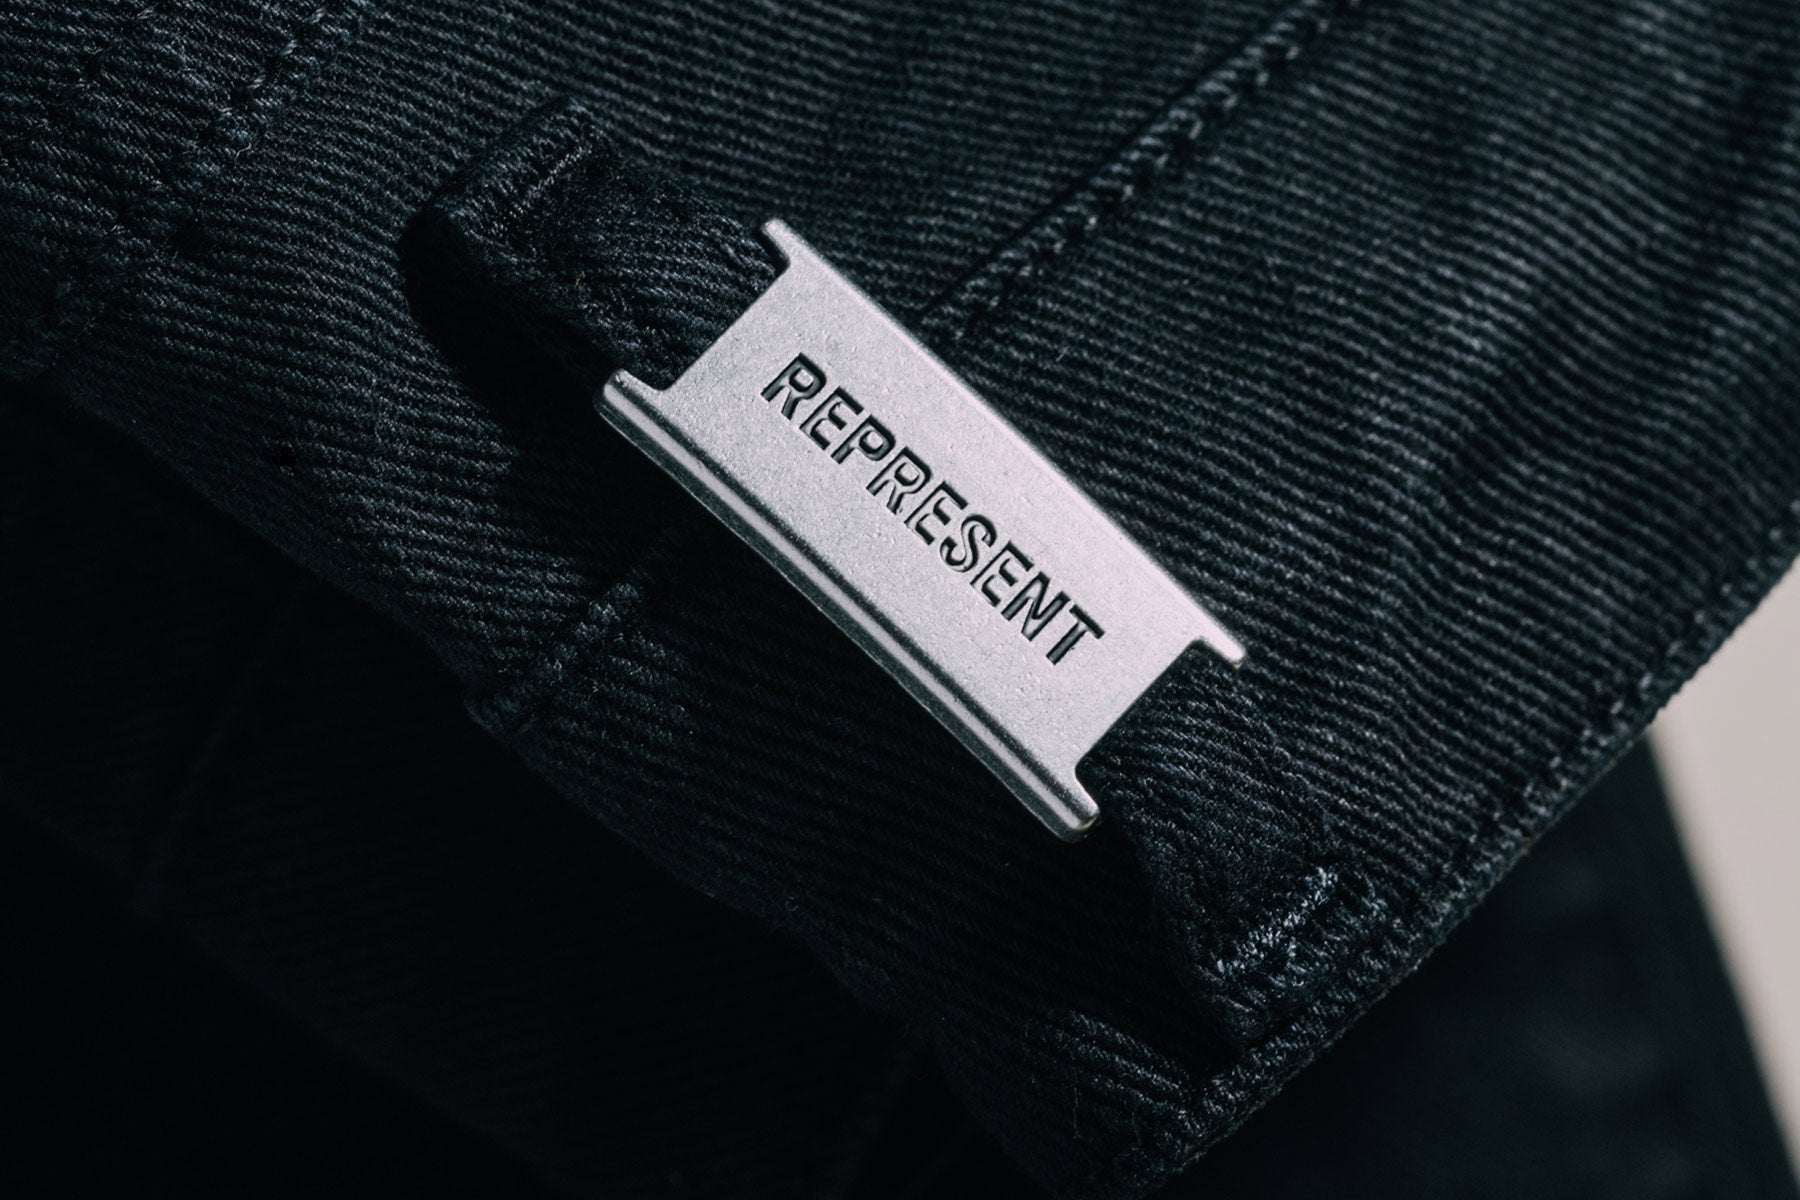 NEW at FEATURE: Represent – Feature